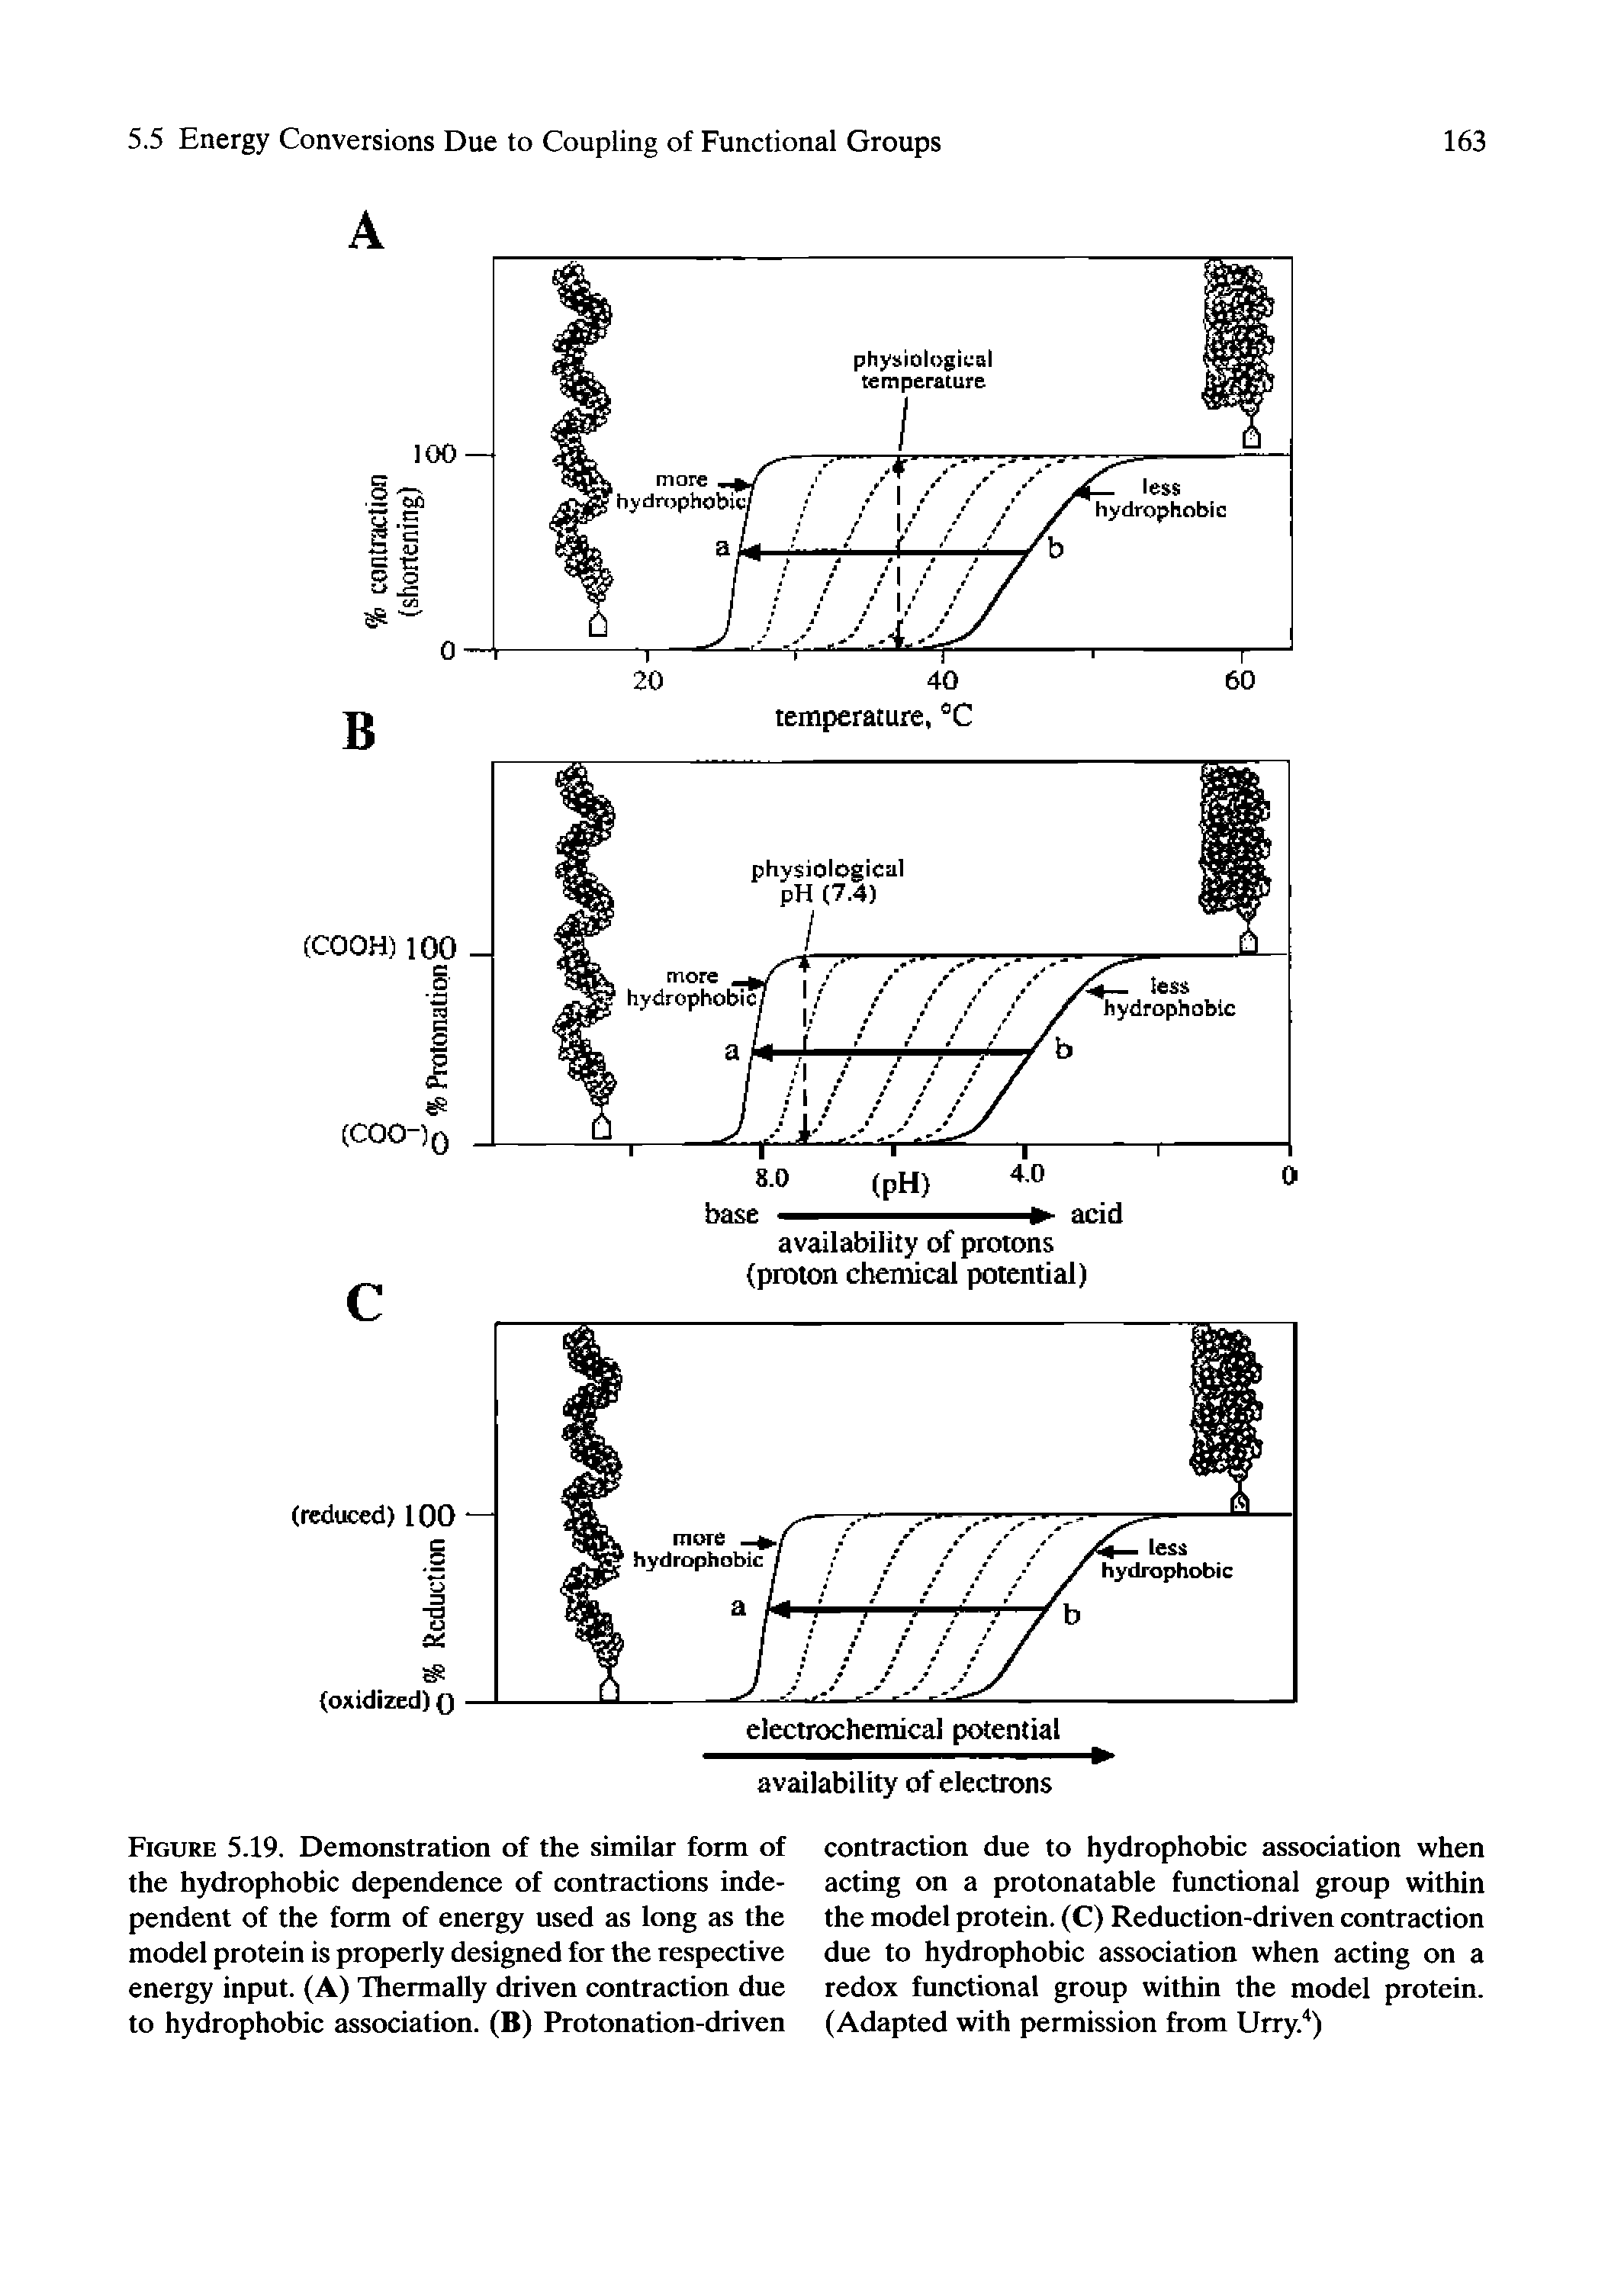 Figure 5.19. Demonstration of the similar form of the hydrophobic dependence of contractions independent of the form of energy used as long as the model protein is properly designed for the respective energy input. (A) Hiermally driven contraction due to hydrophobic association. (B) Protonation-driven...